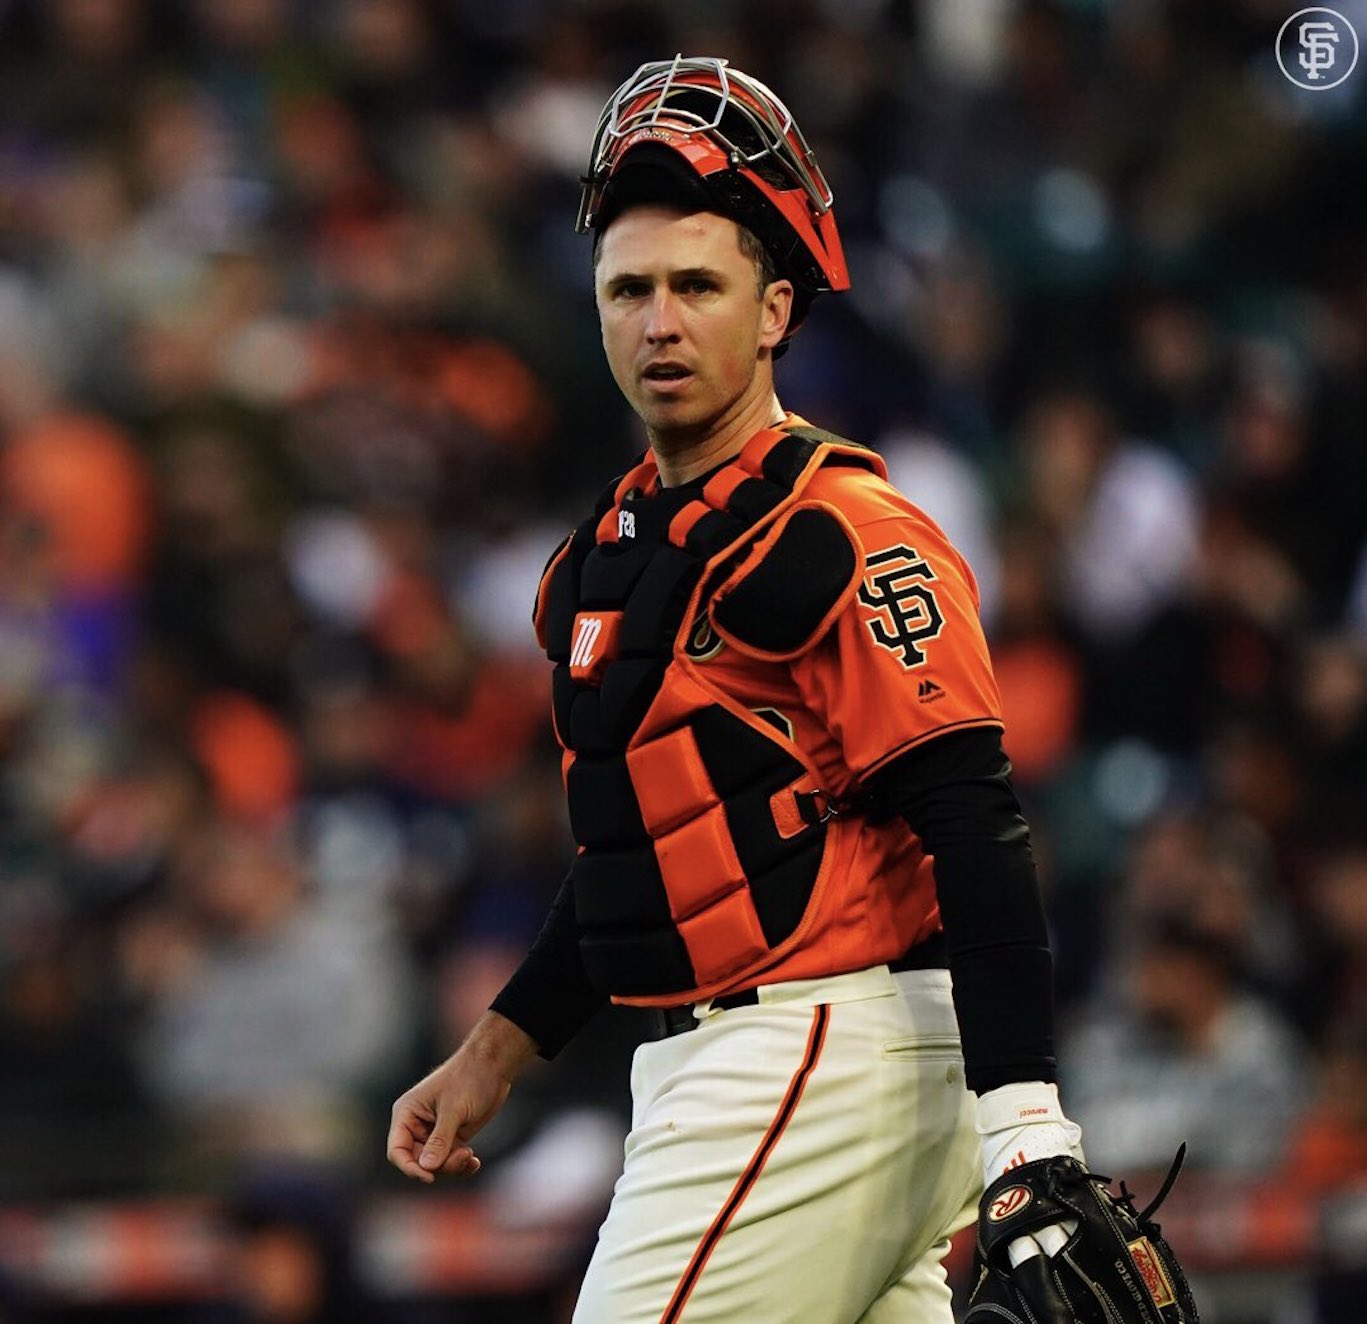 buster posey 2021